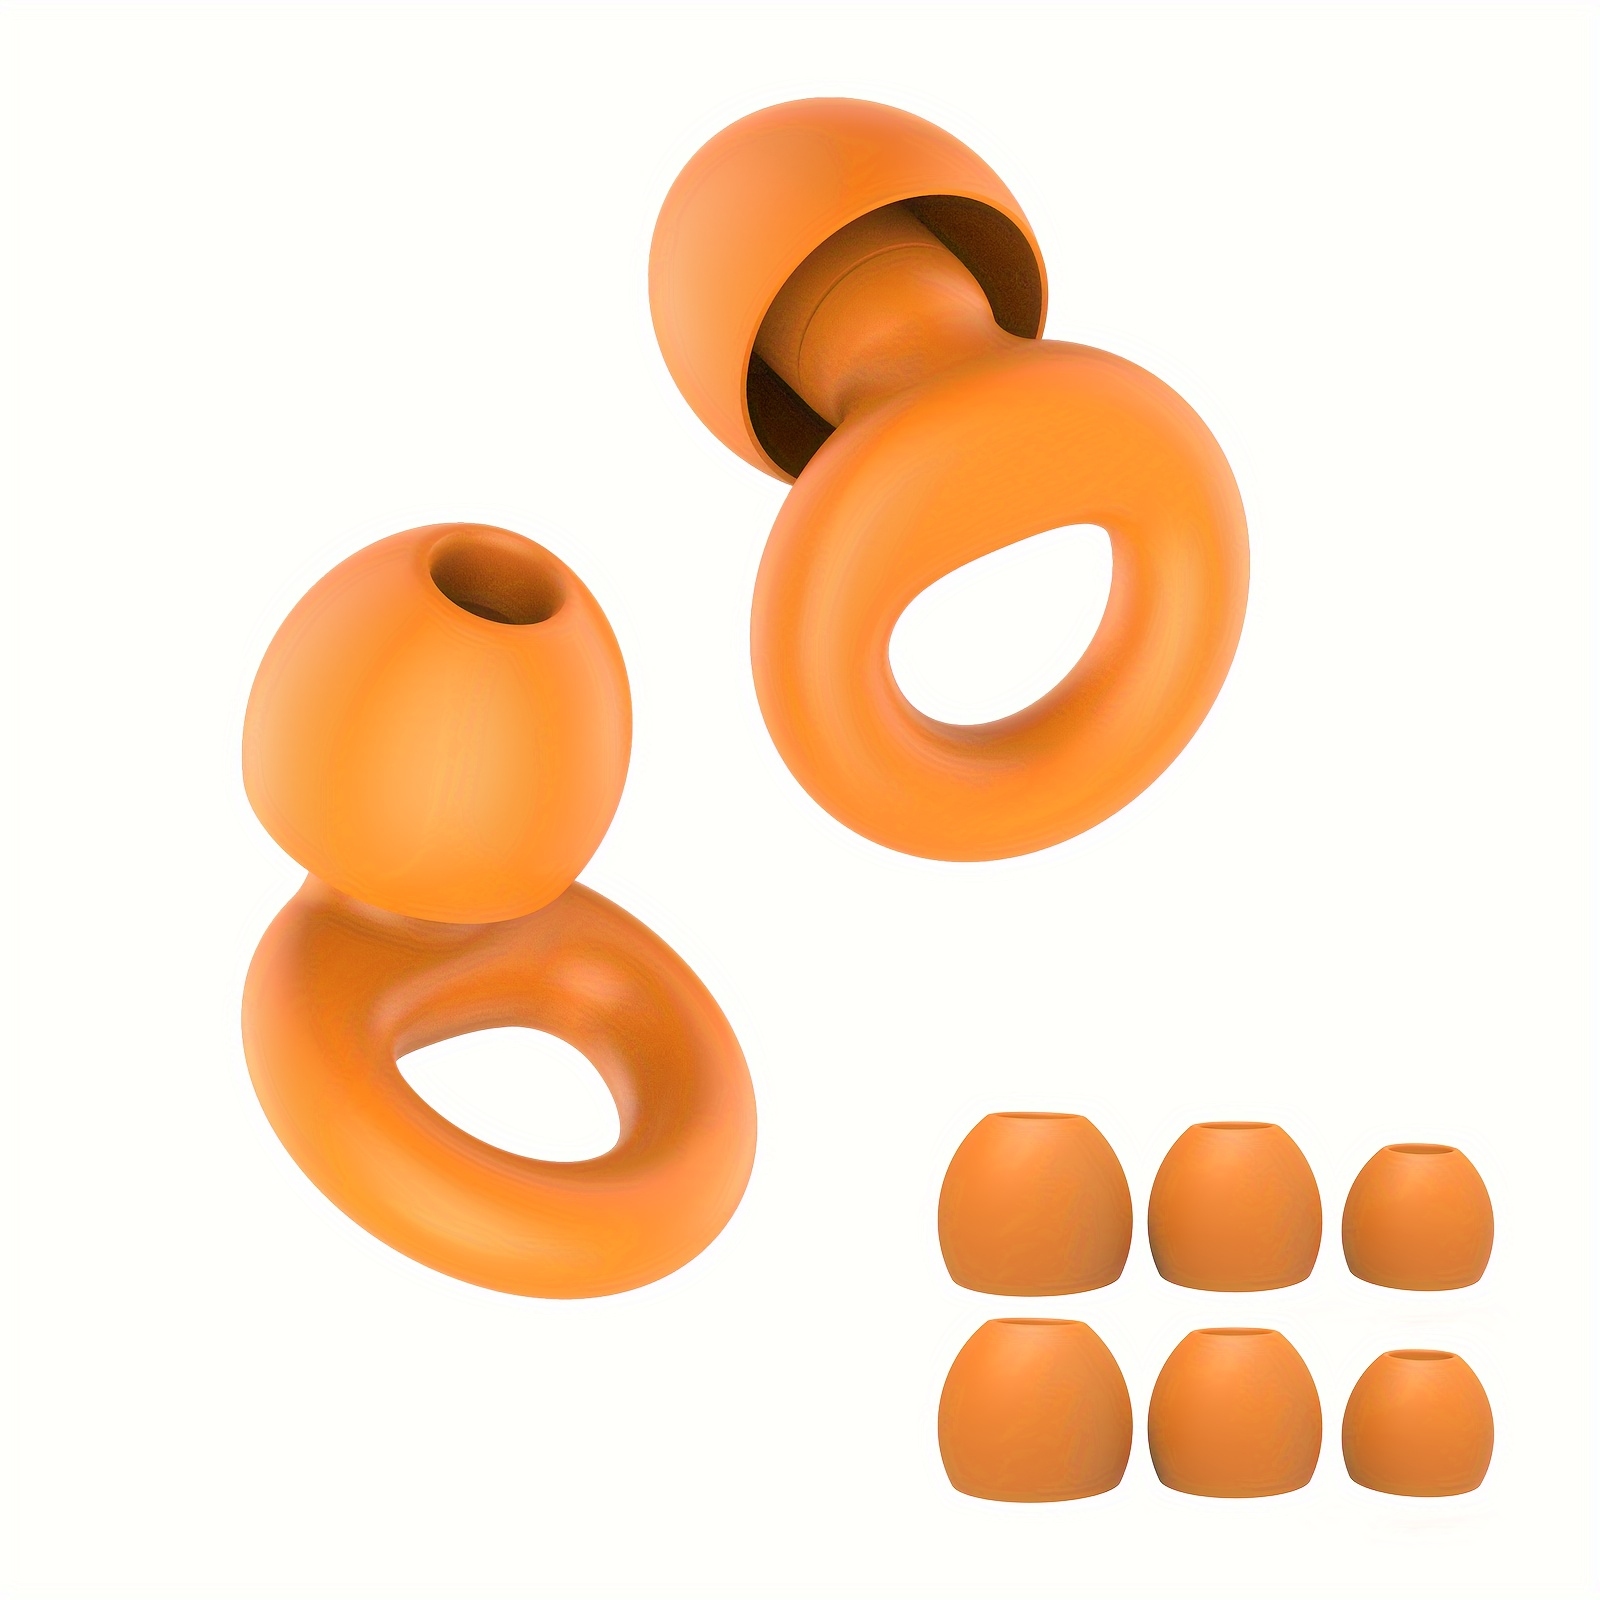  Loop Quiet Ear Plugs for Noise Reduction – Super Soft, Reusable  Hearing Protection in Flexible Silicone for Sleep & Noise Sensitivity - 8  Ear Tips in XS/S/M/L – 26dB & NRR